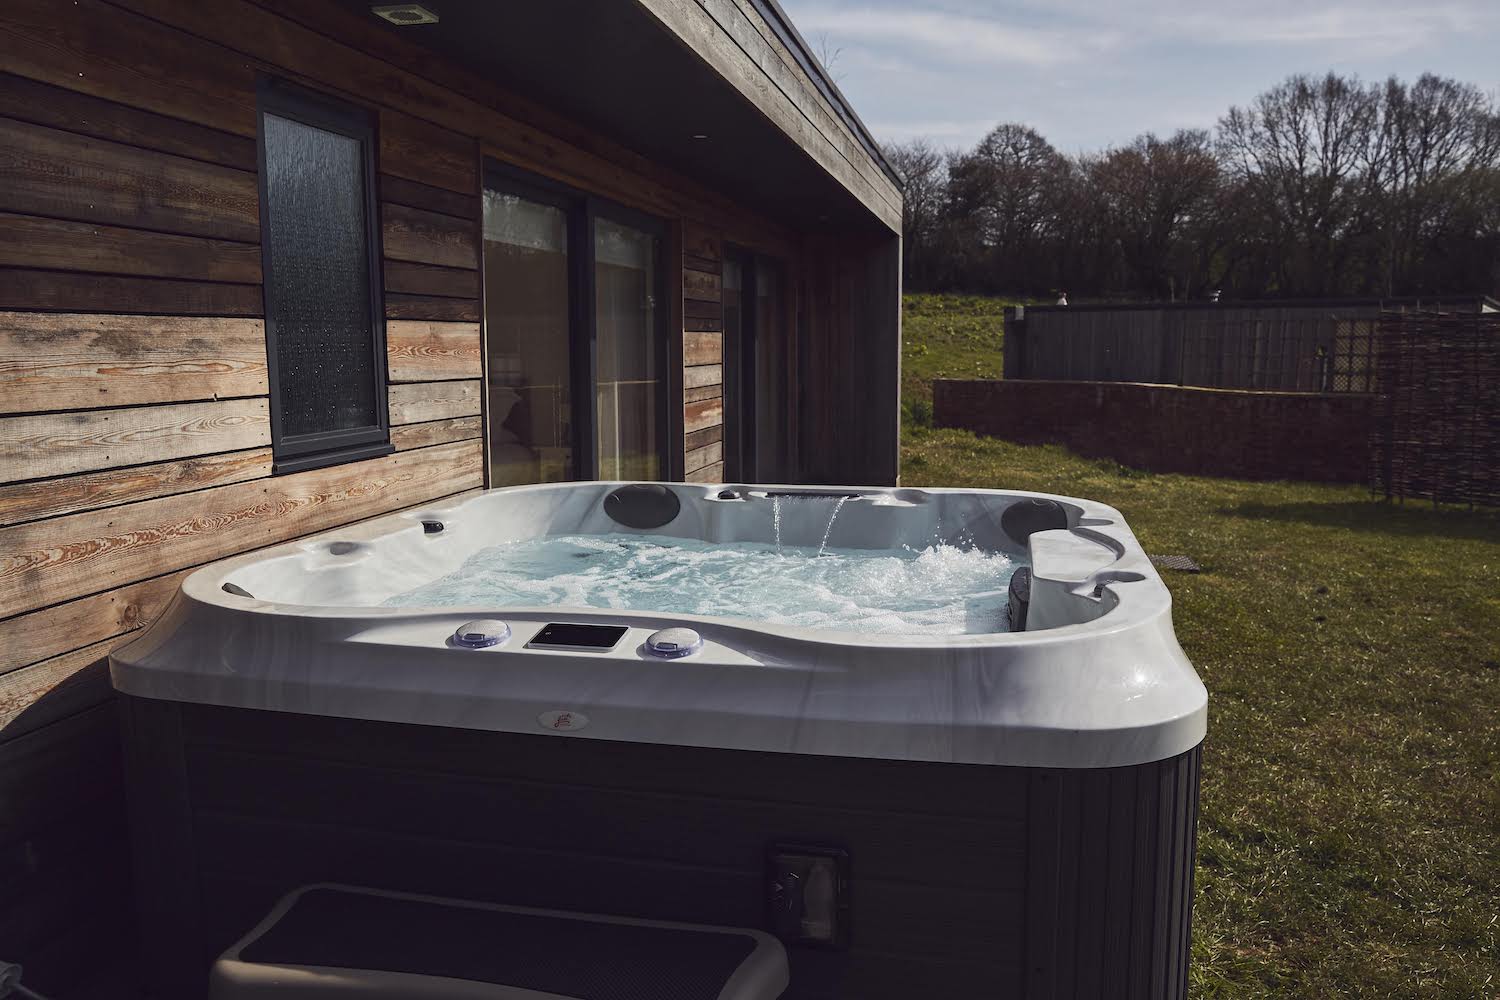 Hot tub maintenance essentials: top tips for clean and clear hot tub water